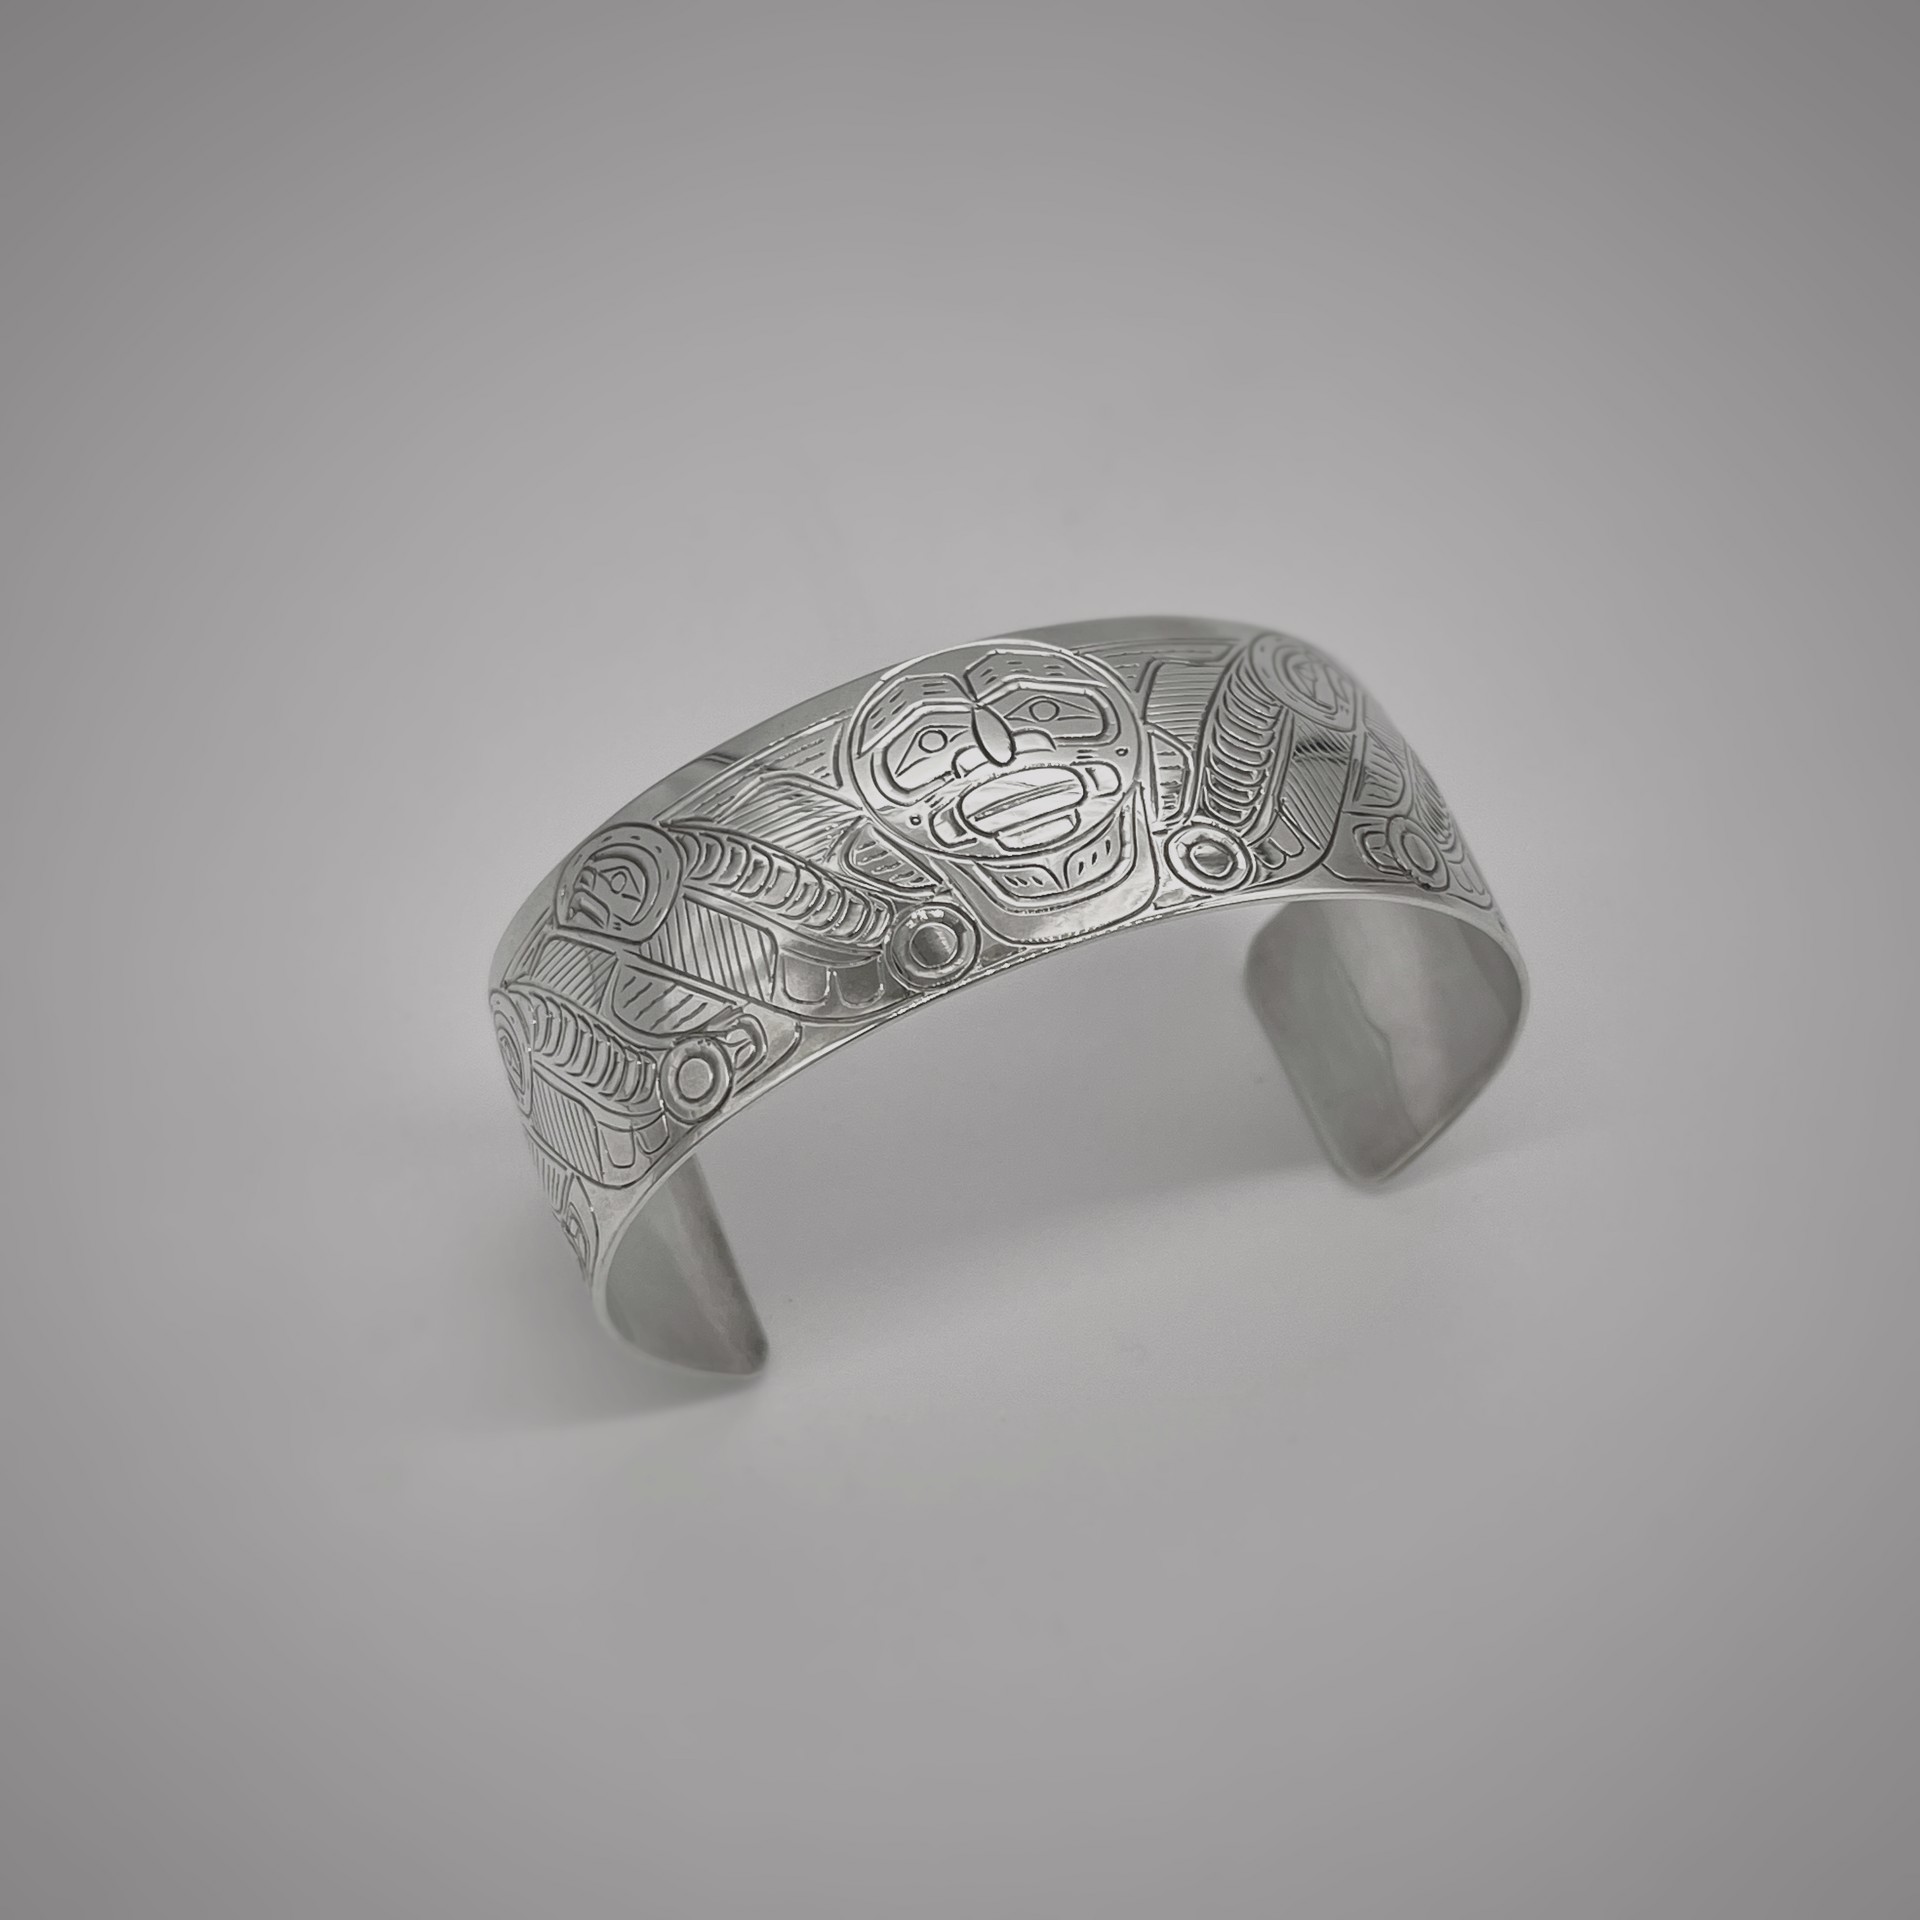 Silver Salmon Moon Bracelet by William Cook